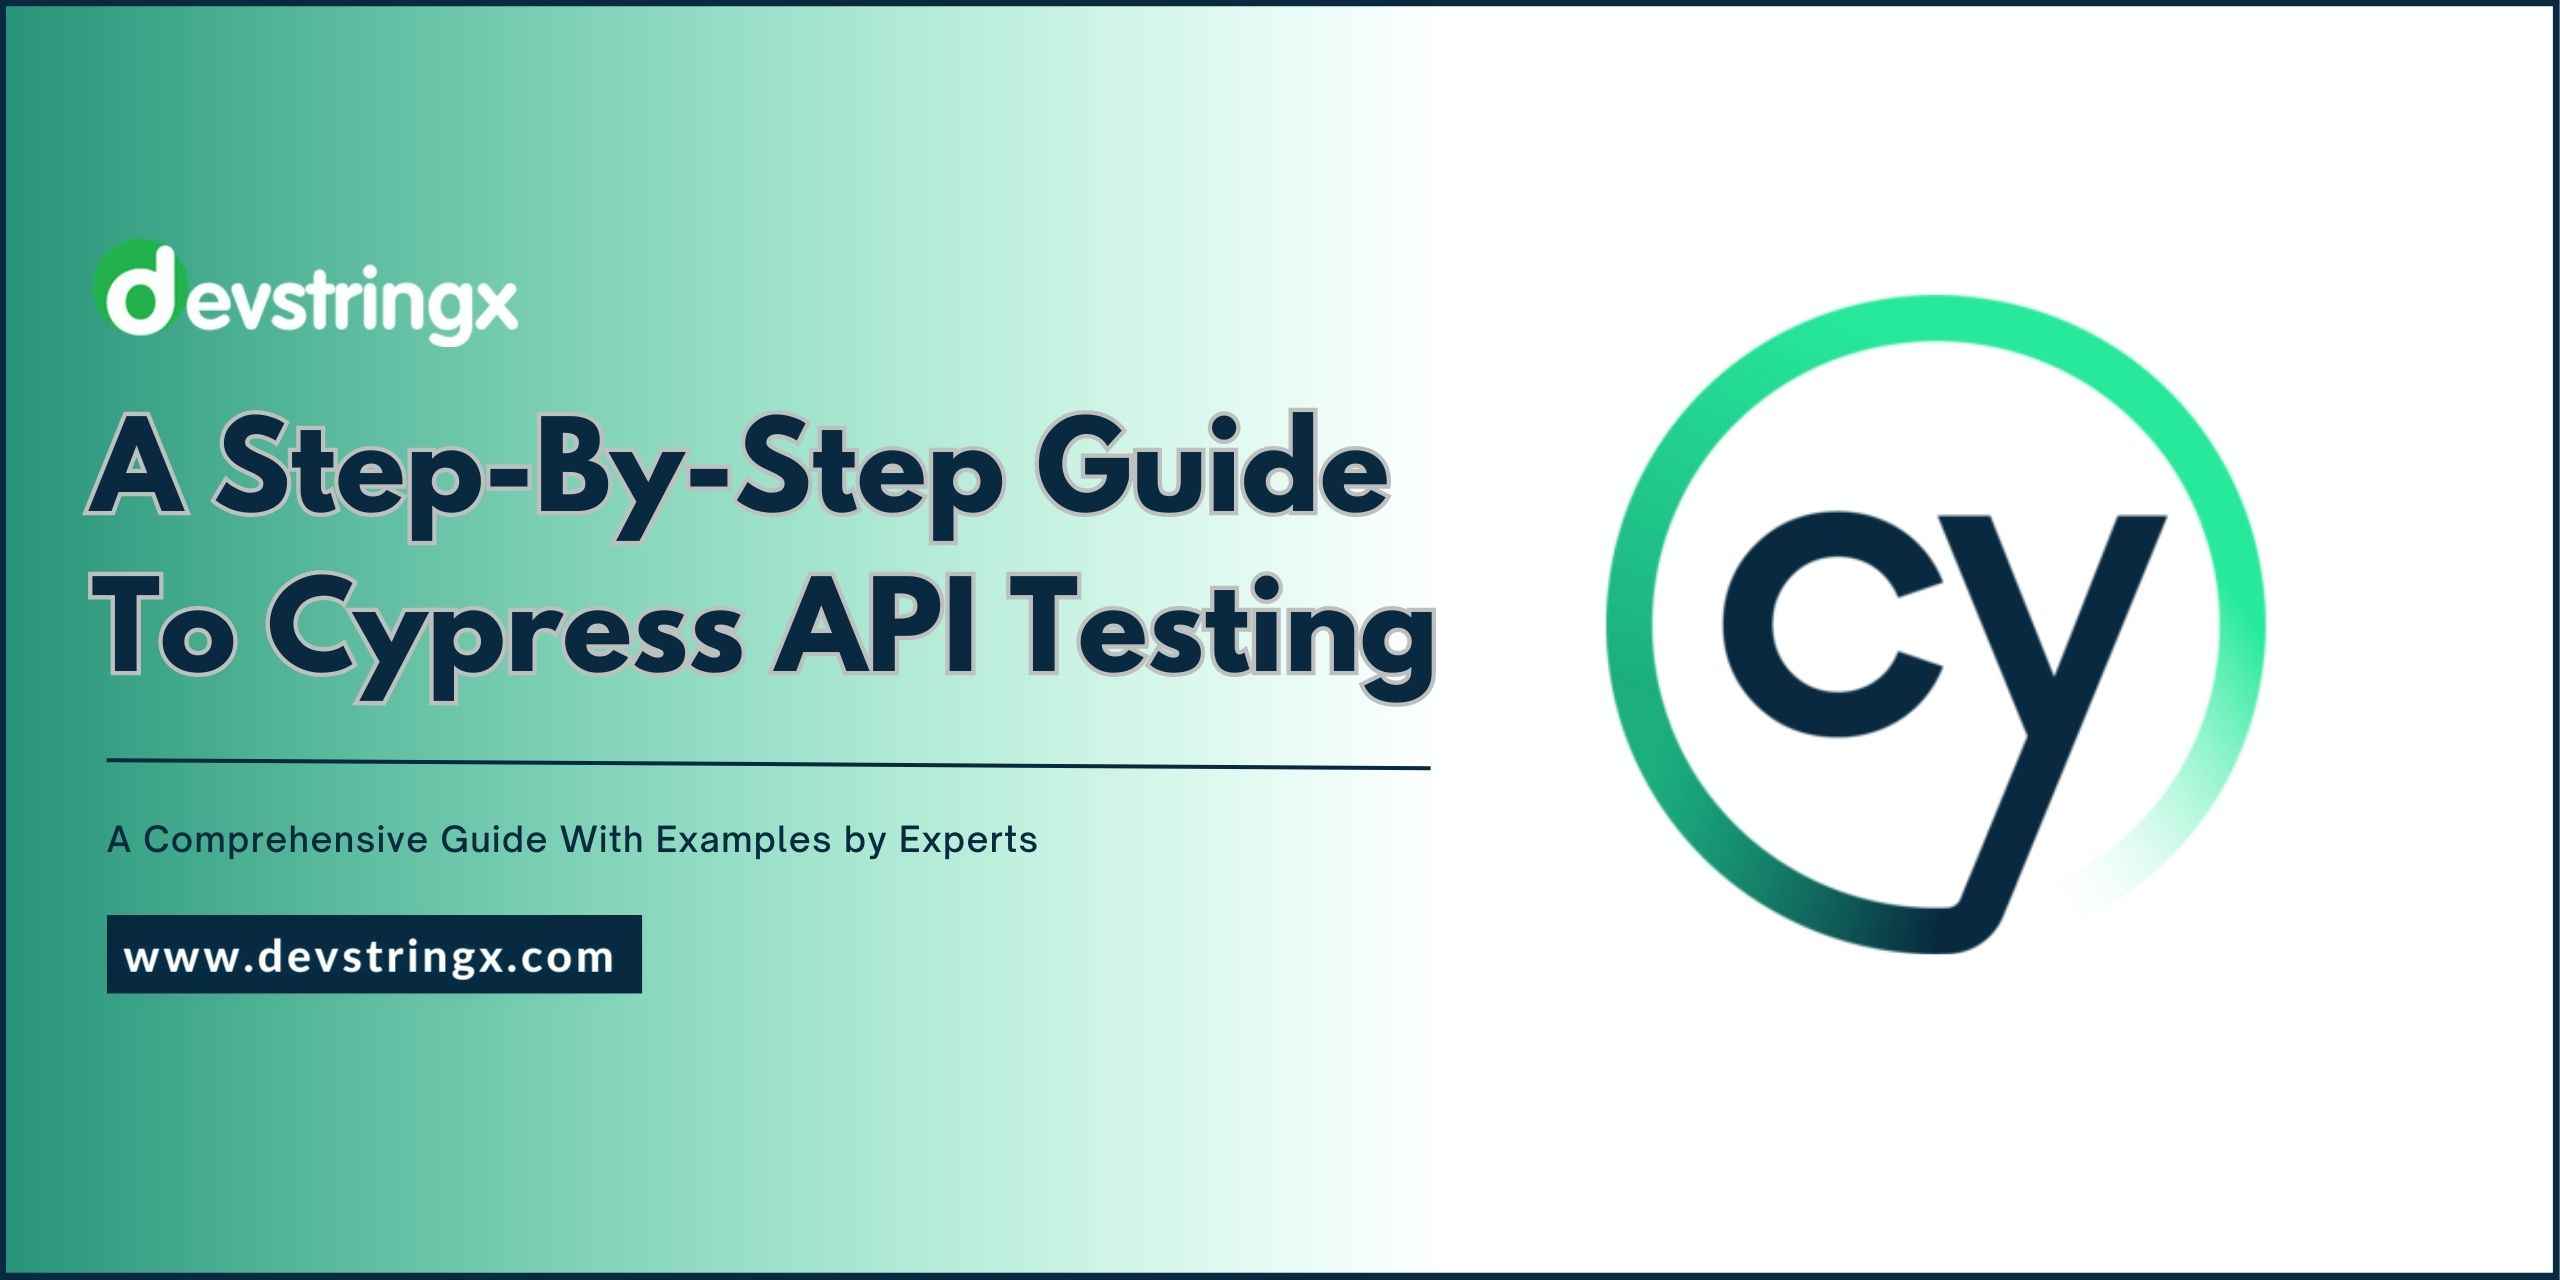 Feature image for cypress API testing blog